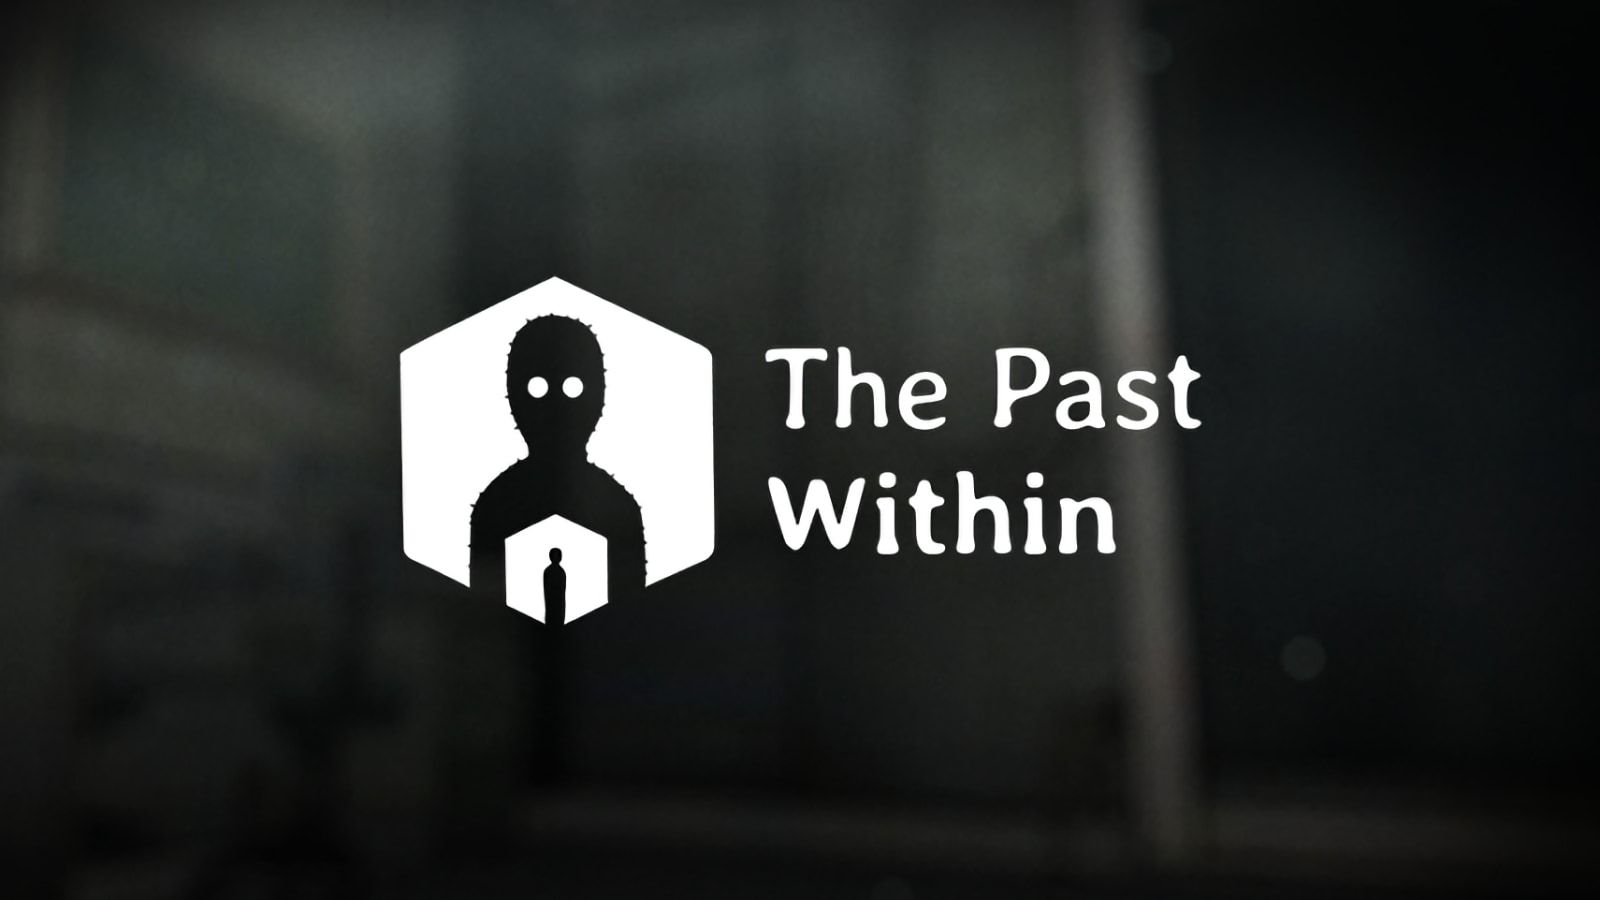 The past within rusty